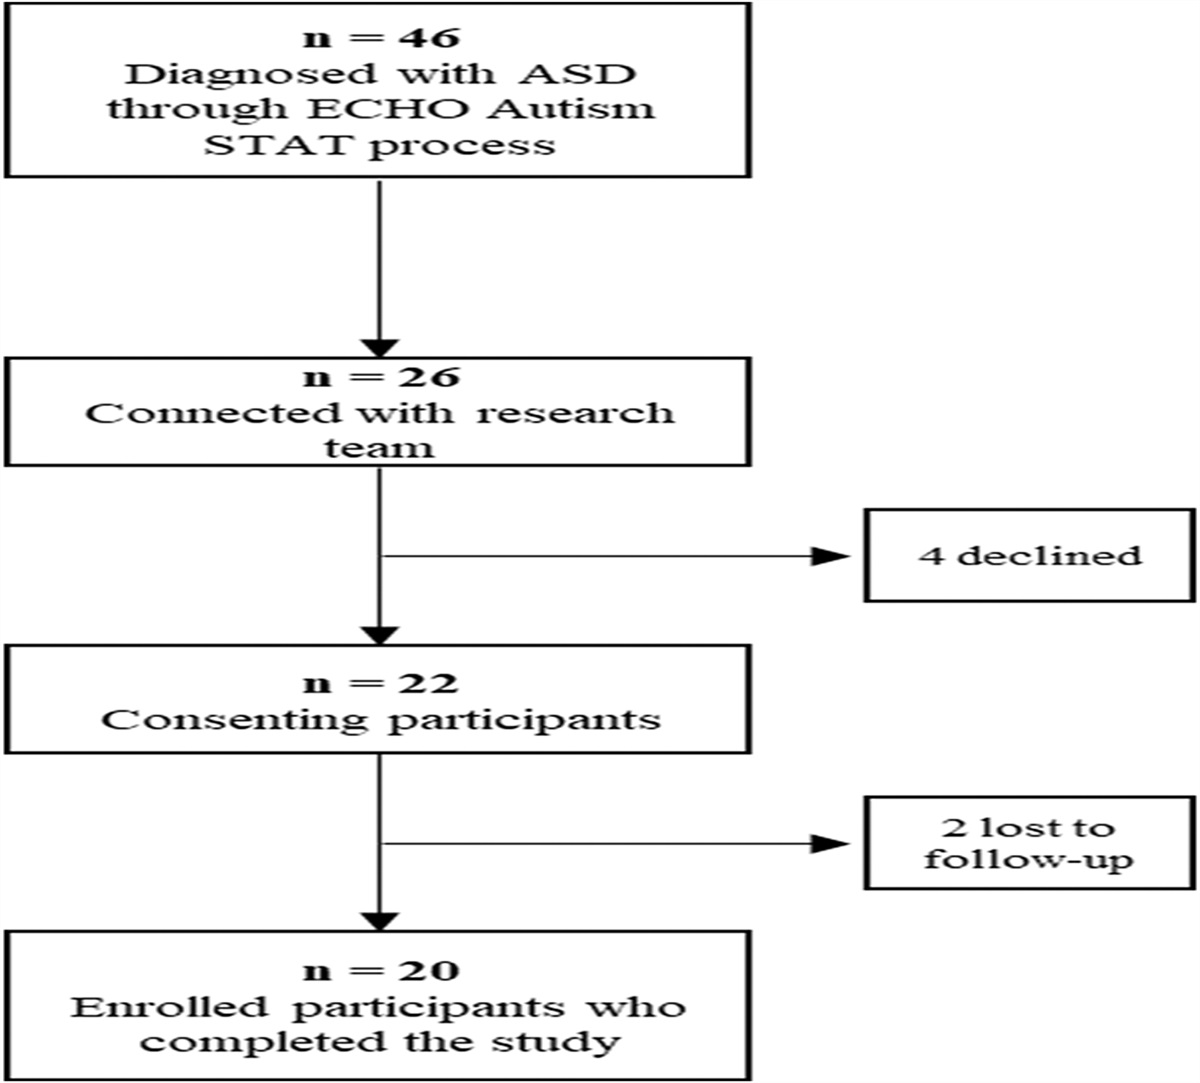 ECHO (Extension for Community Healthcare Outcomes) Autism STAT: A Diagnostic Accuracy Study of Community-Based Primary Care Diagnosis of Autism Spectrum Disorder